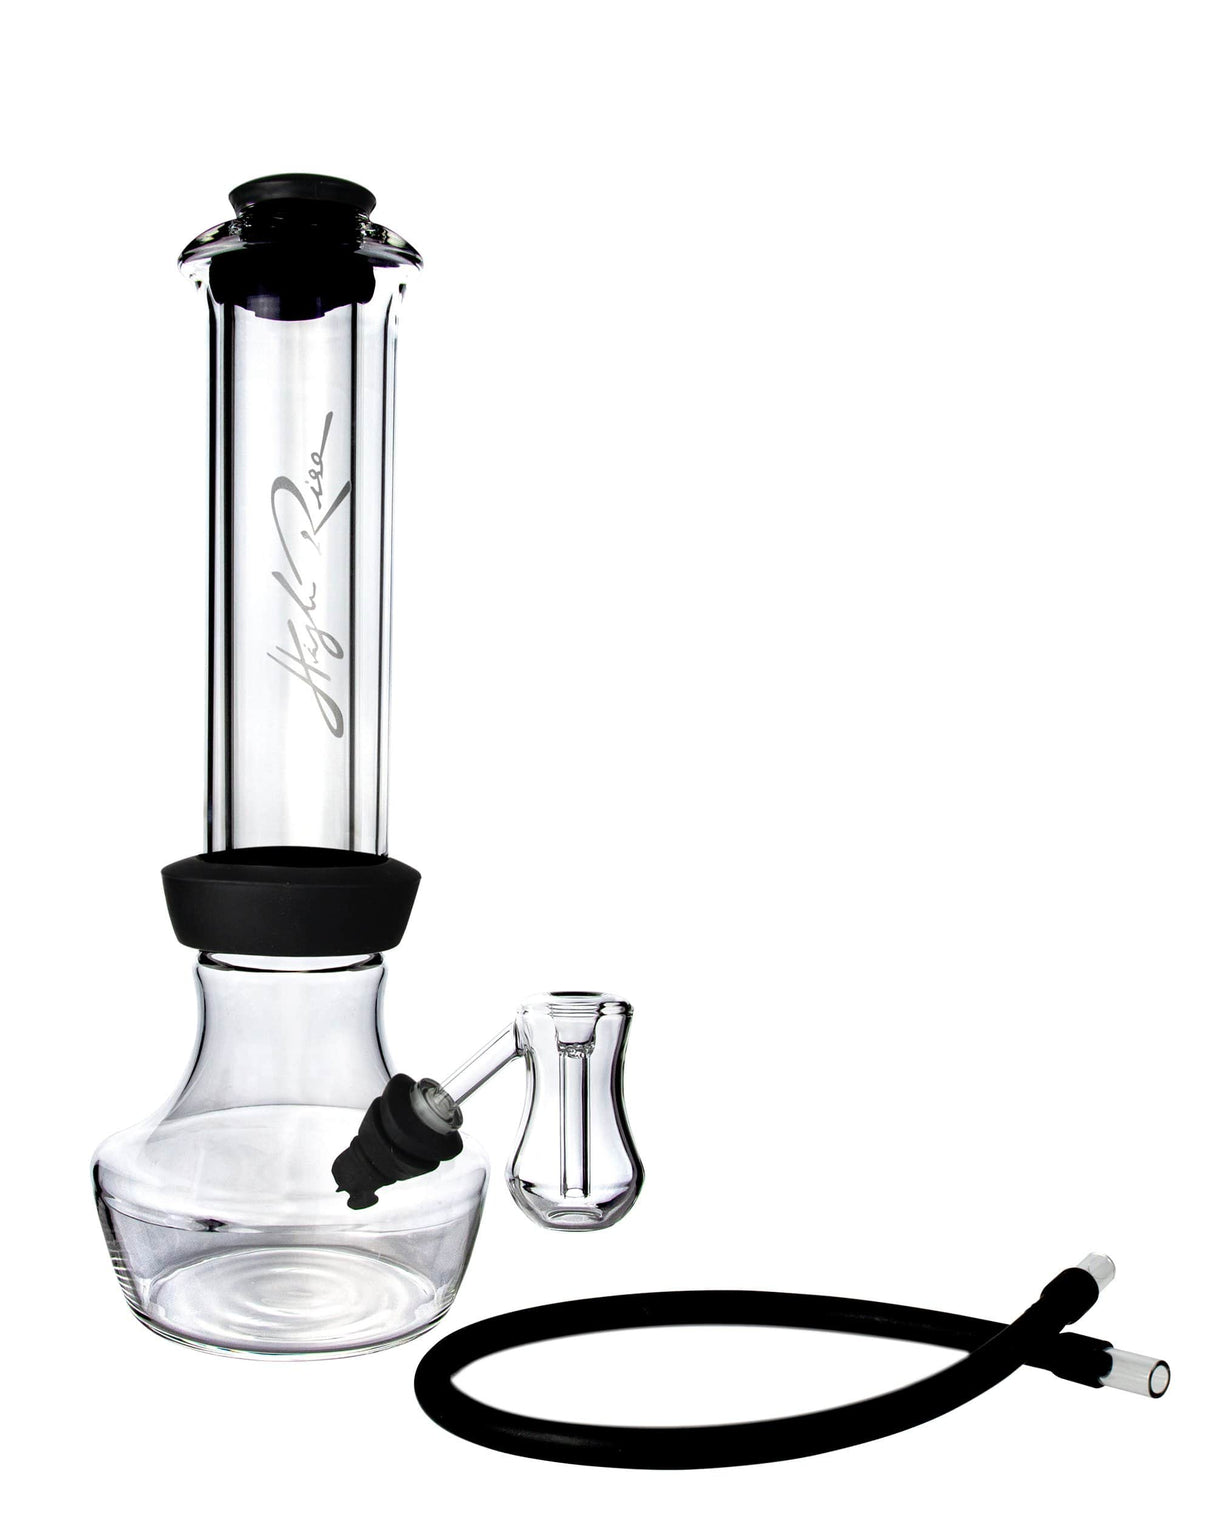 High Rise Gravity Bong by HighRise in clear borosilicate glass, extra large with silicone base